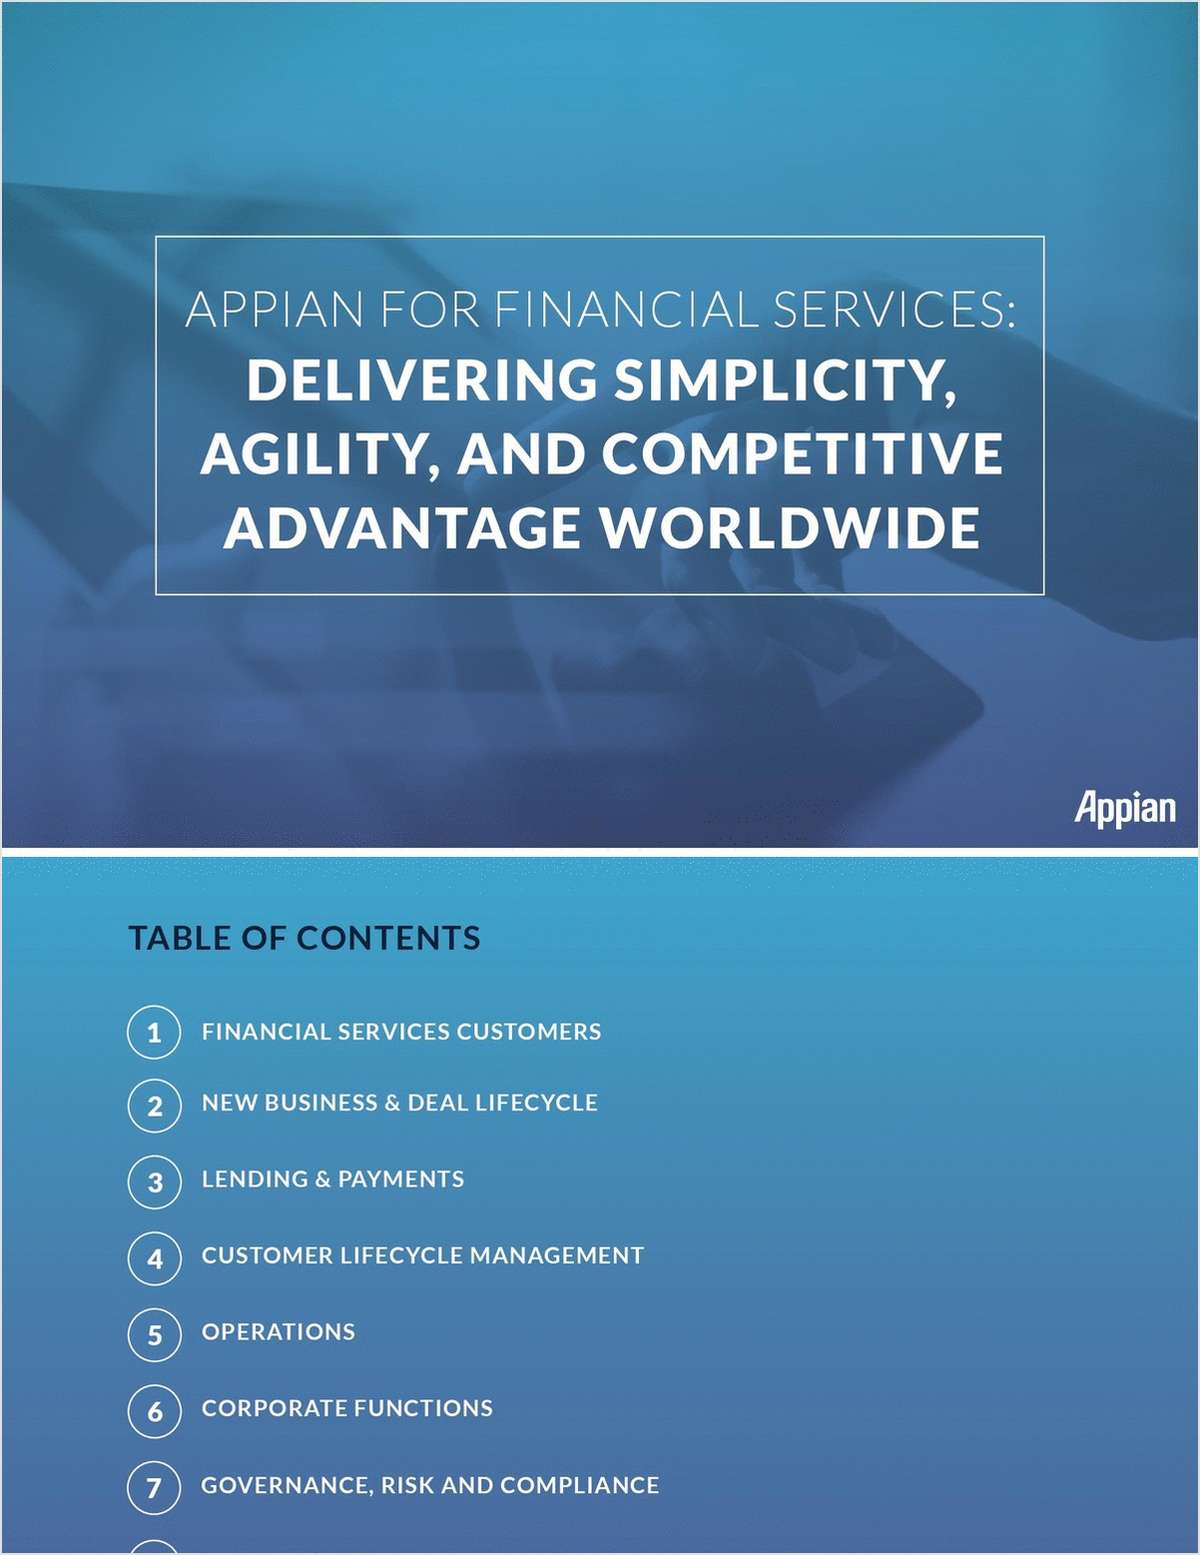 Appian for Financial Services -- Delivering Simplicity, Agility, and Competitive Advantage Worldwide